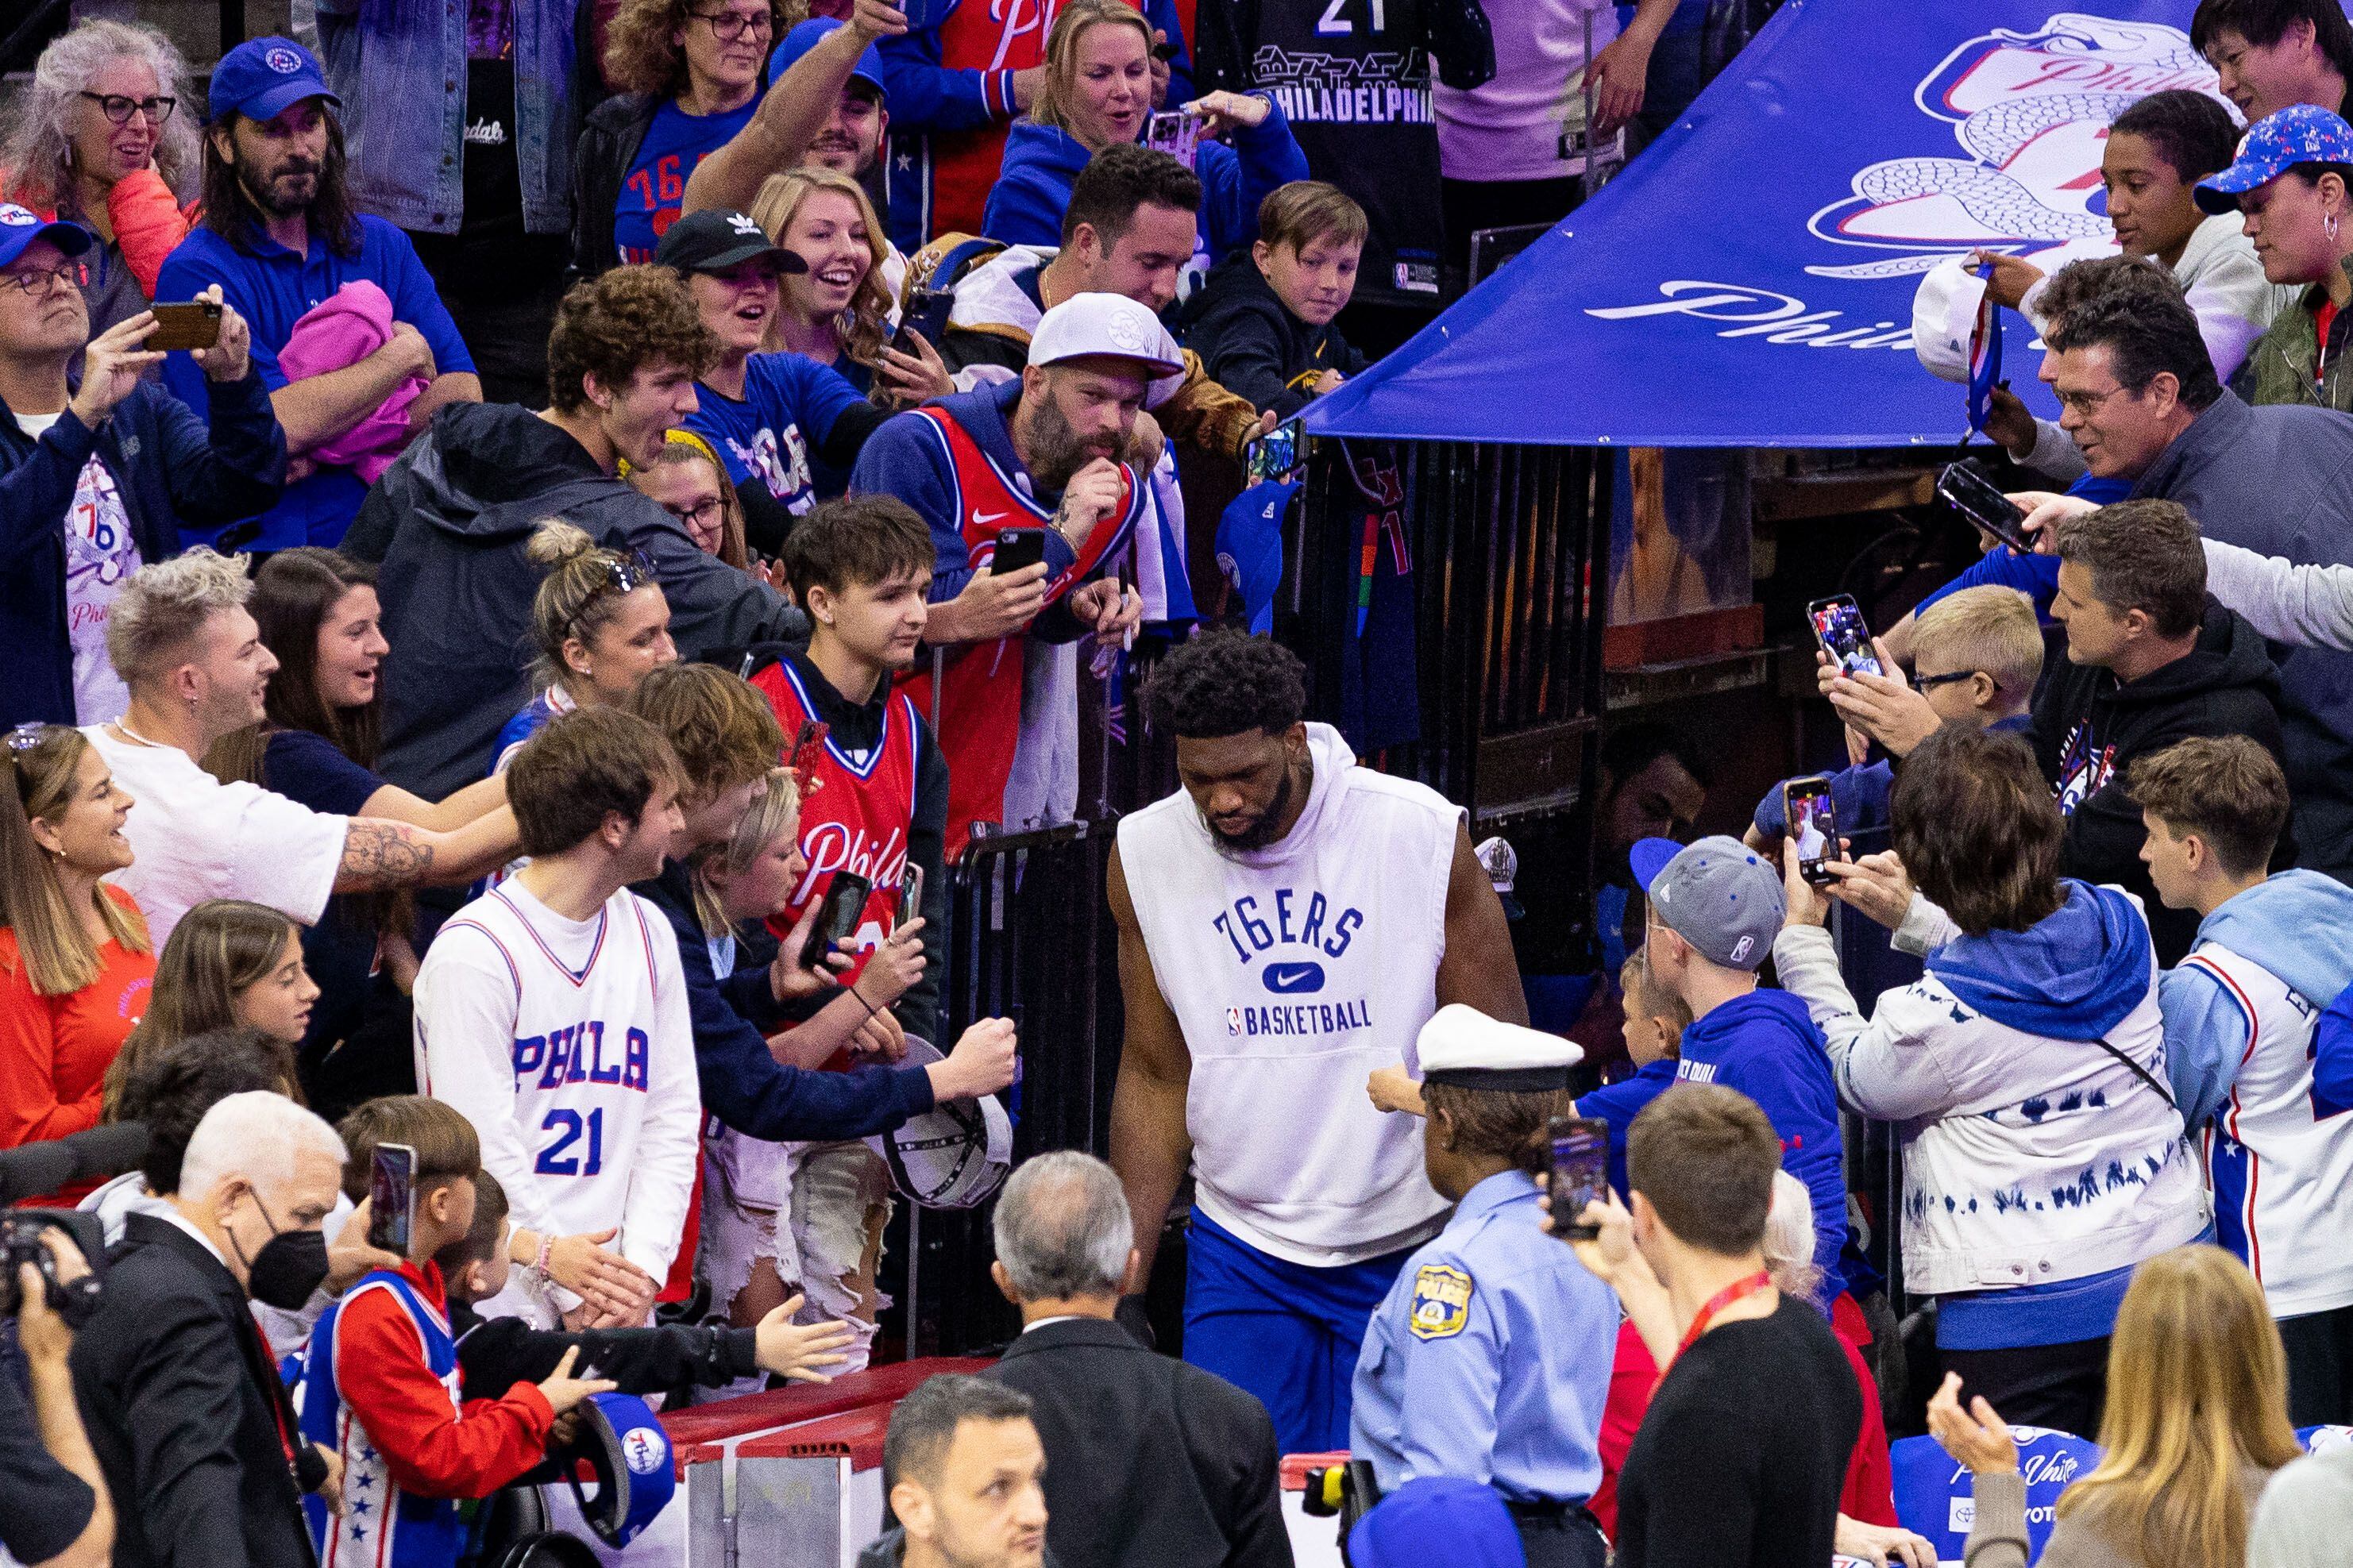 May 8, 2022; Philadelphia, Pennsylvania, USA; Fans gather around the locker room tunnel as Philadelphia 76ers center Joel Embiid takes the court for warm ups before action against the Miami Heat in game four of the second round for the 2022 NBA playoffs at Wells Fargo Center. Mandatory Credit: Bill Streicher-USA TODAY Sports